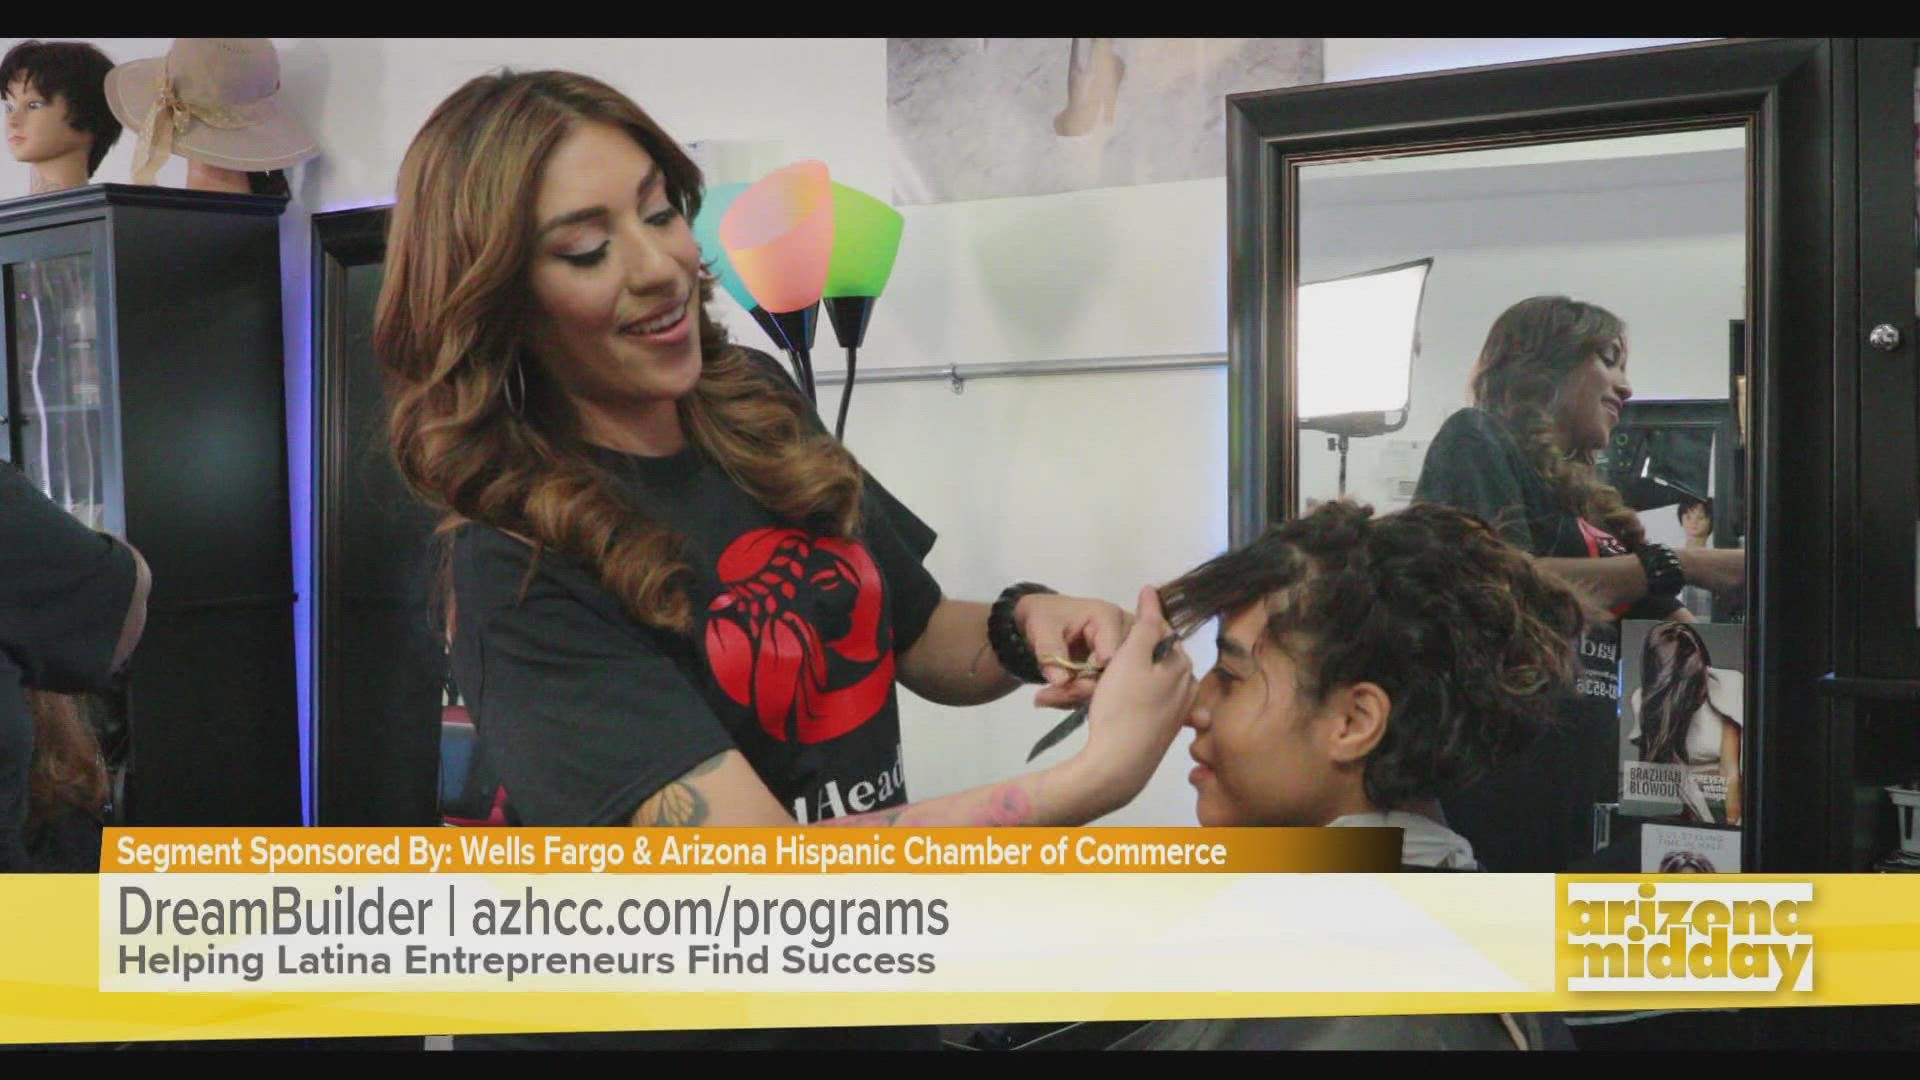 Sesily Gutierrez shares her story on how DreamBuilders brought her salon, HotHeadz, to life!